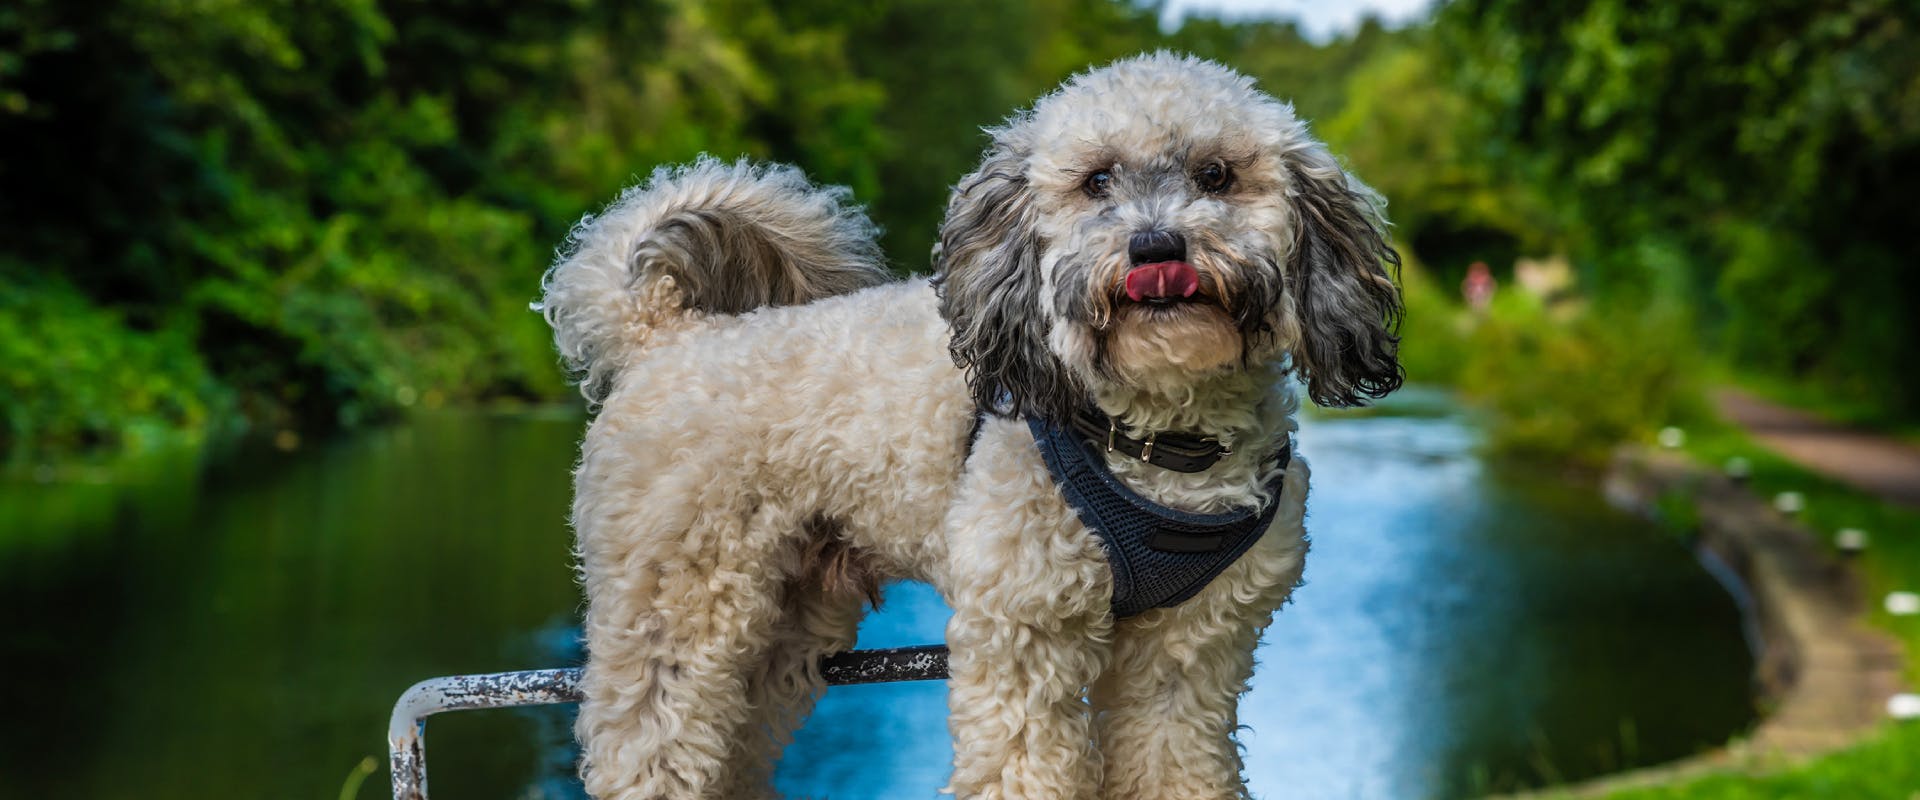 a small gray dog in a black harness stood on top of a canal lock while licking its nose